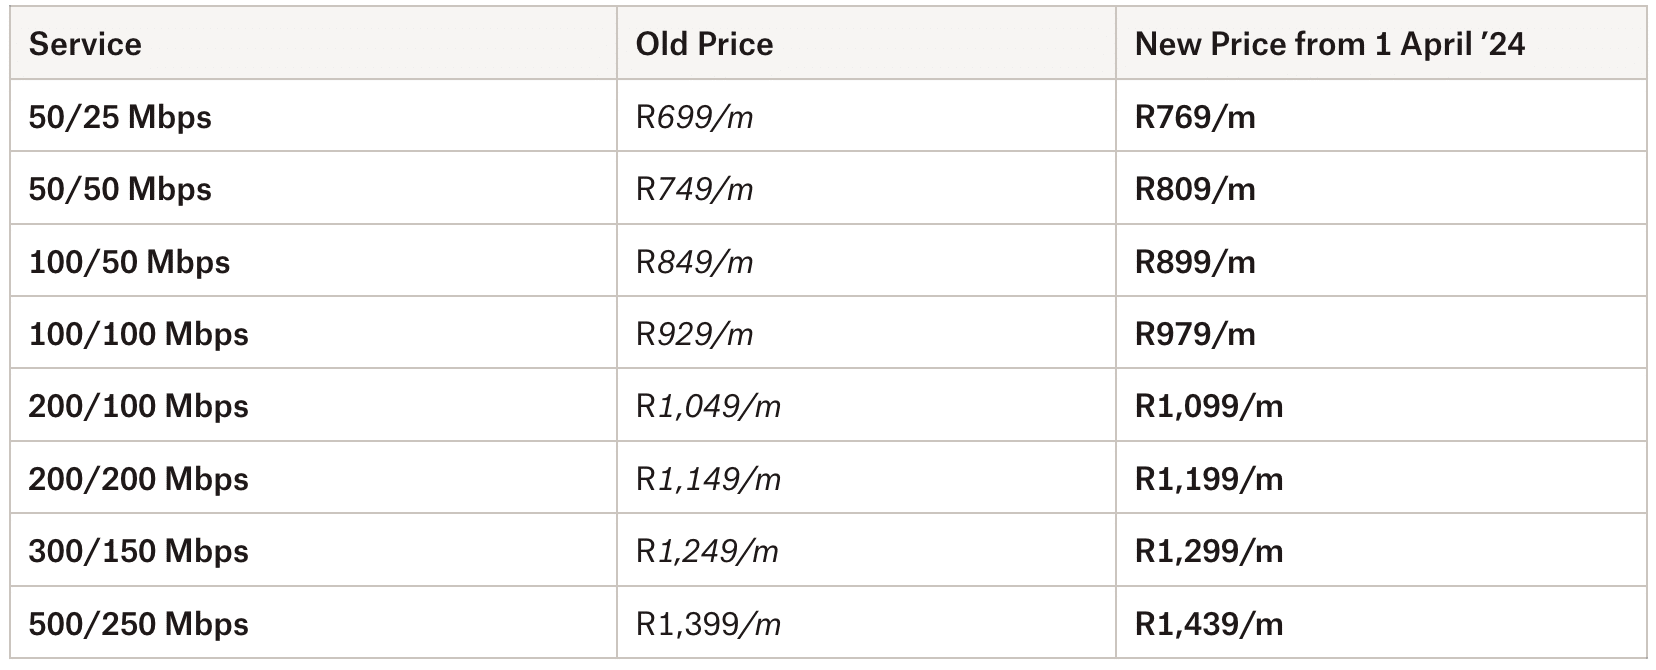 Openserve Pricing from 1 April 2024